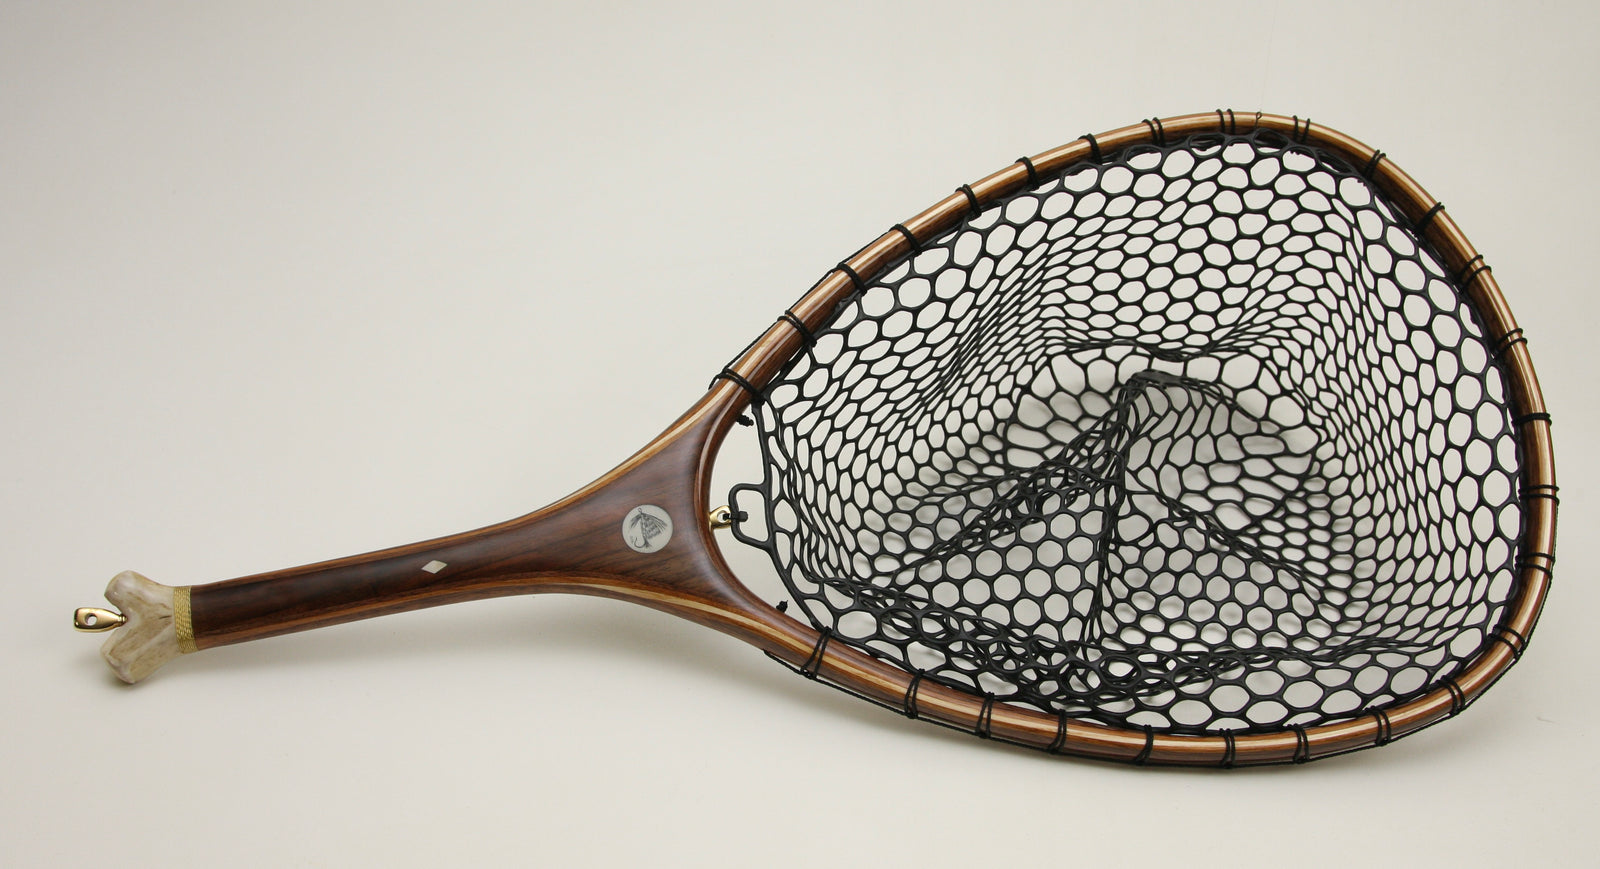 Large Landing Nets for Fly Fishing - Nets that Honor the Fish